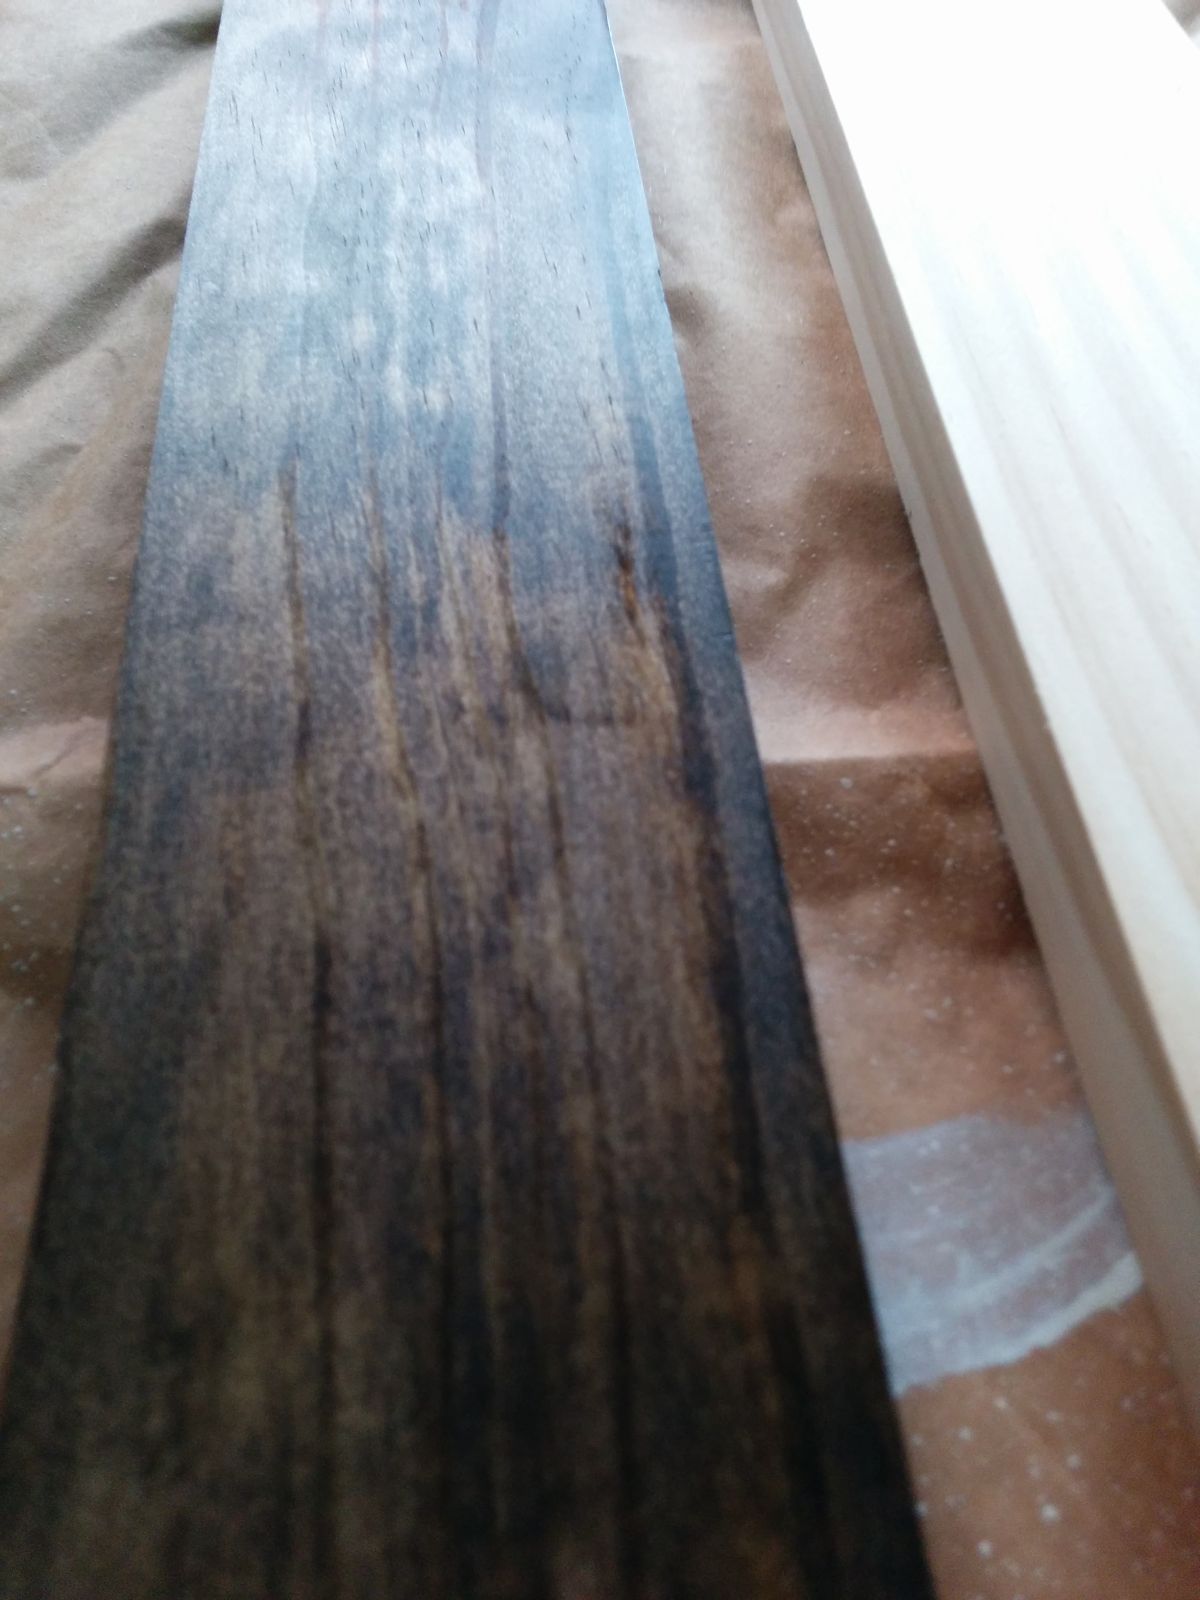 Dark wood stain picture ledge